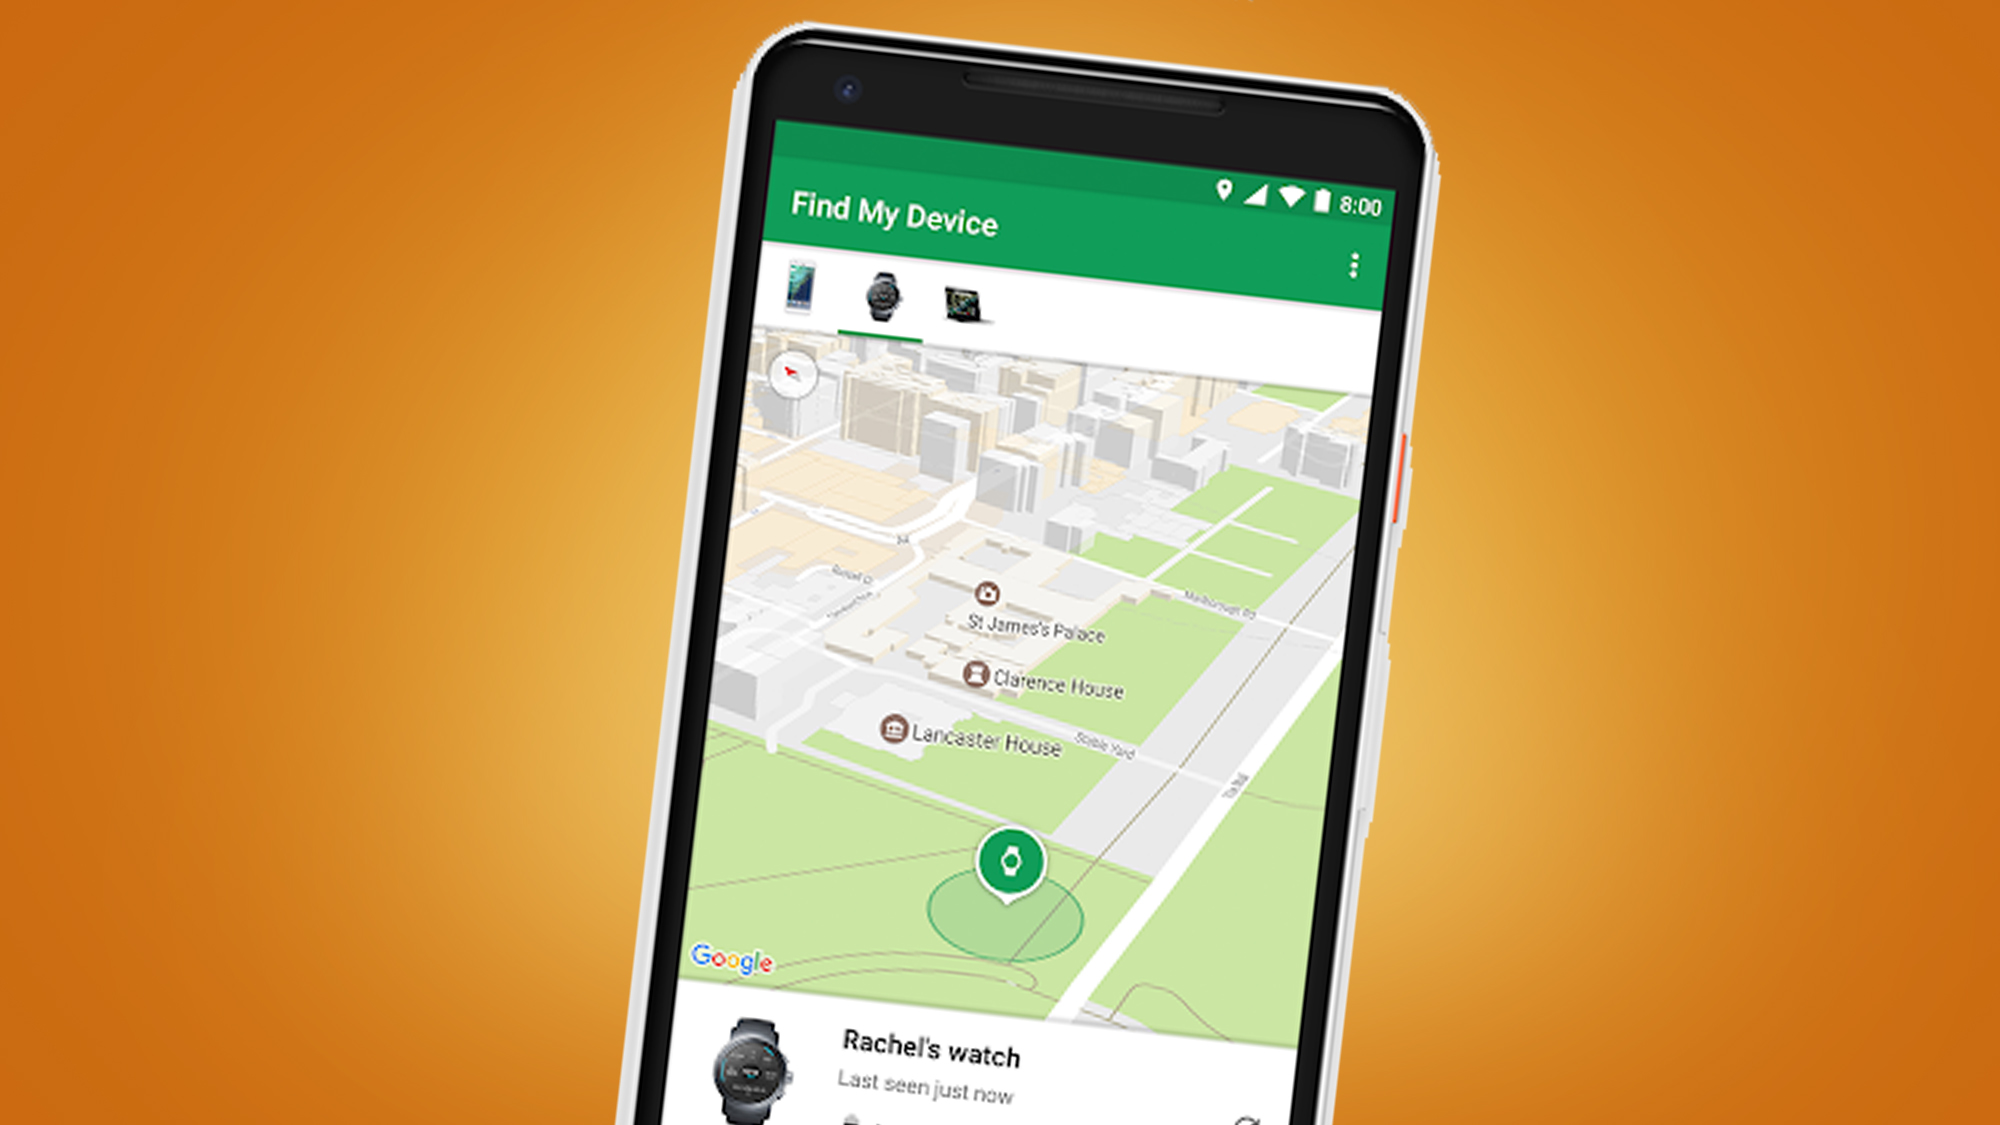 An Android phone on an orange background showing the FInd My Device function